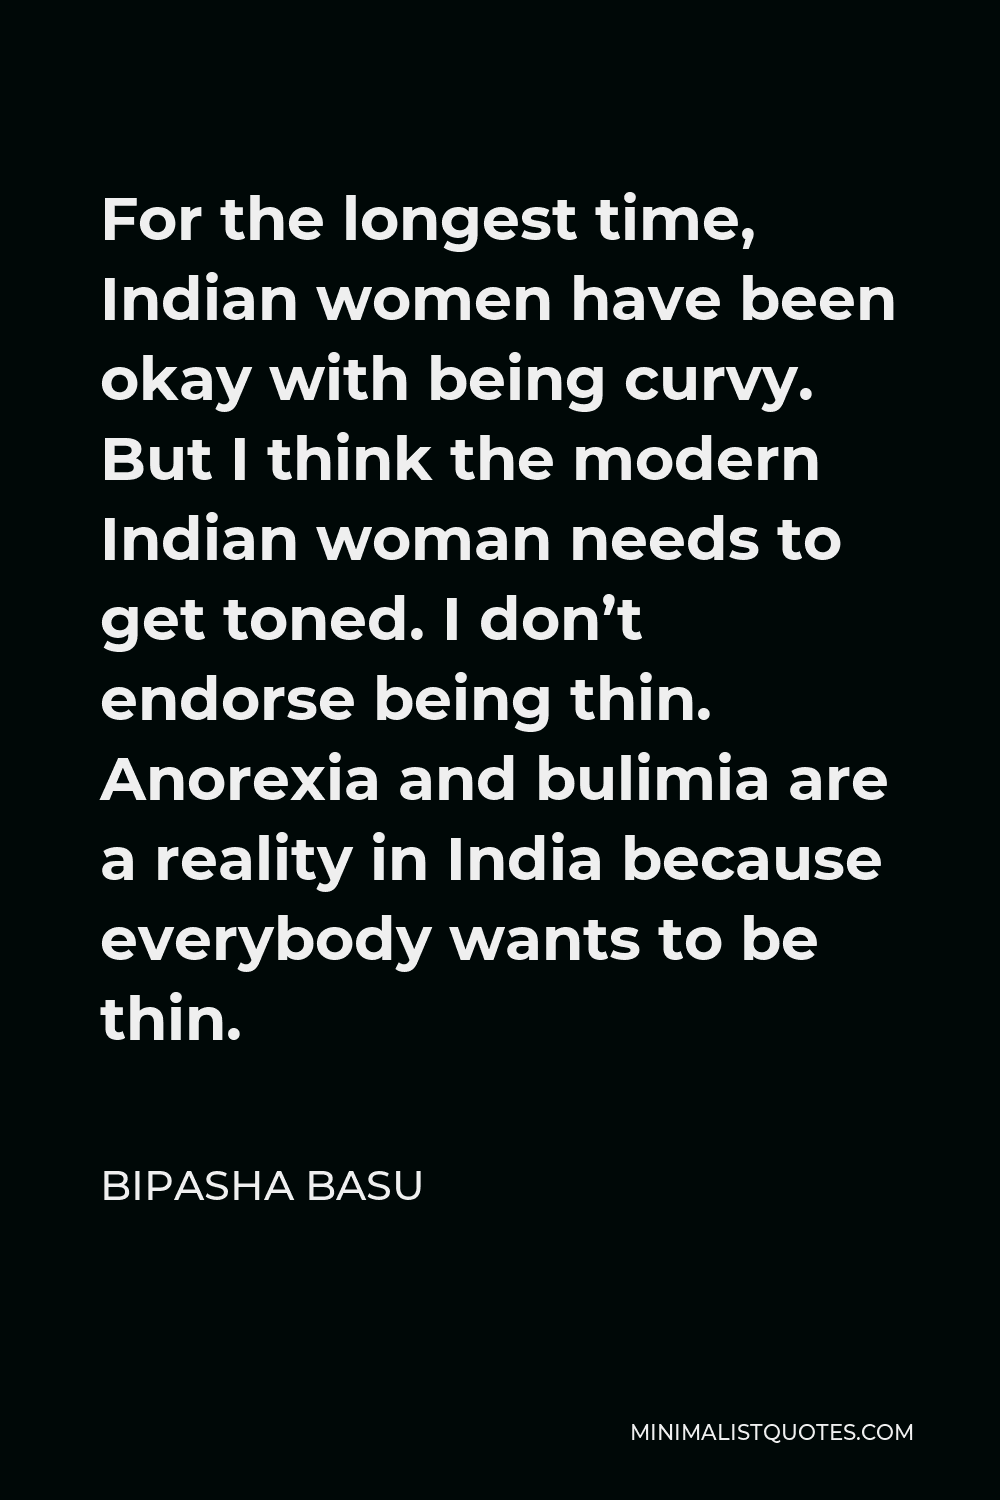 Bipasha Basu Quote - For the longest time, Indian women have been okay with being curvy. But I think the modern Indian woman needs to get toned. I don’t endorse being thin. Anorexia and bulimia are a reality in India because everybody wants to be thin.